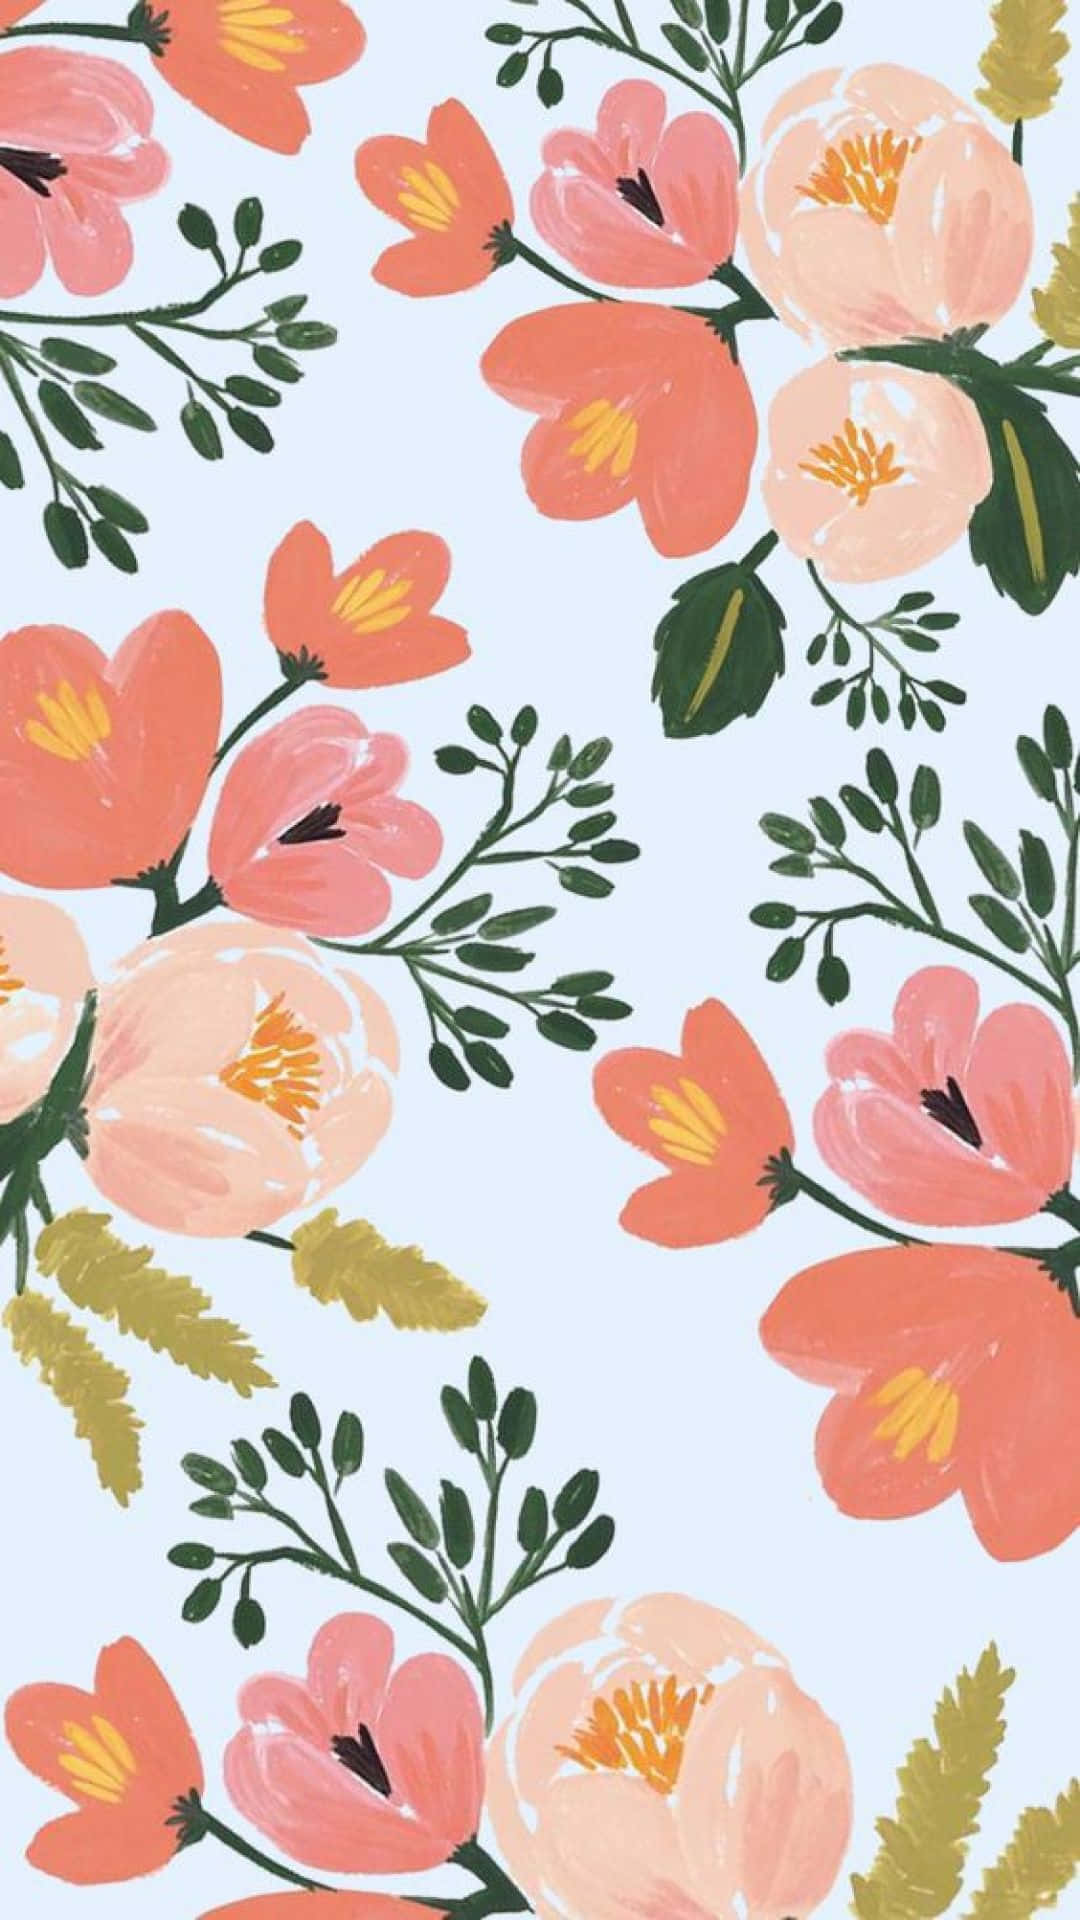 A Floral Pattern With Pink And Orange Flowers